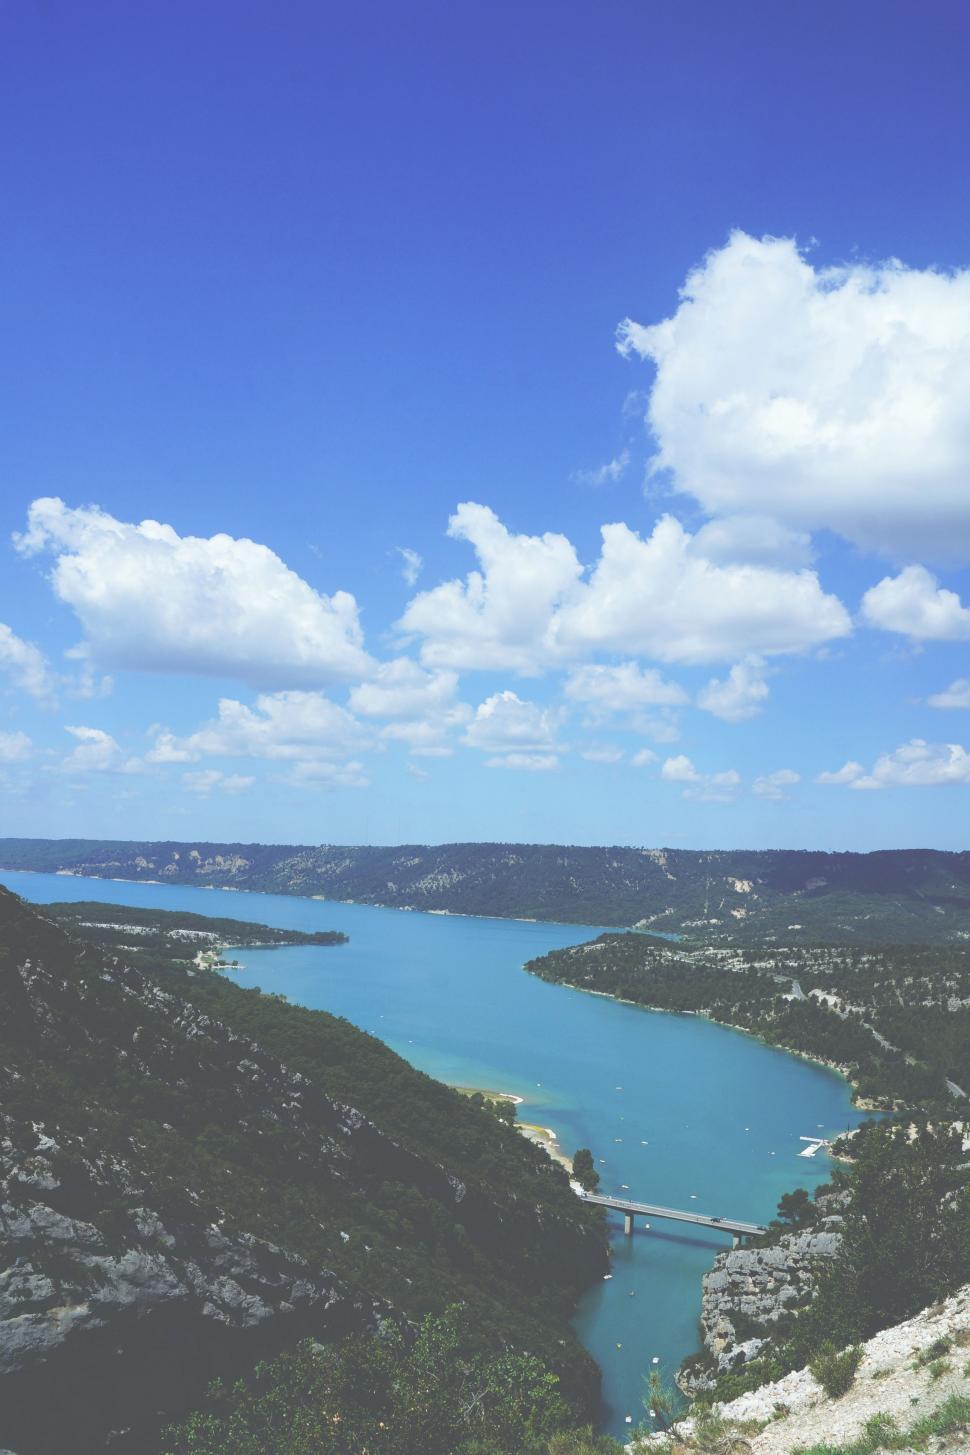 Free Image of Overlooking a Lake From a High Point 